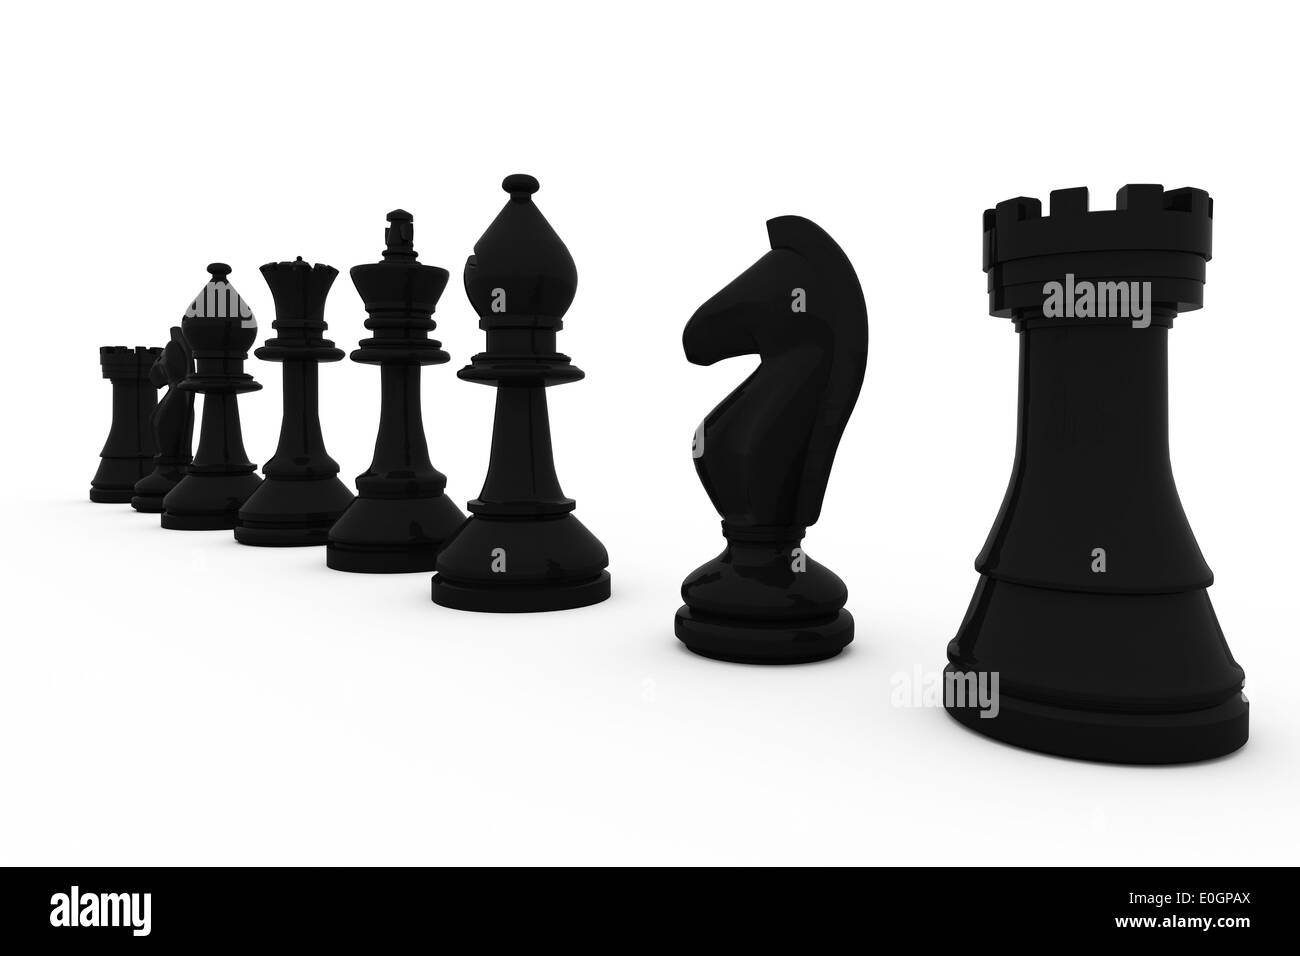 Black chess pieces Black and White Stock Photos & Images - Alamy